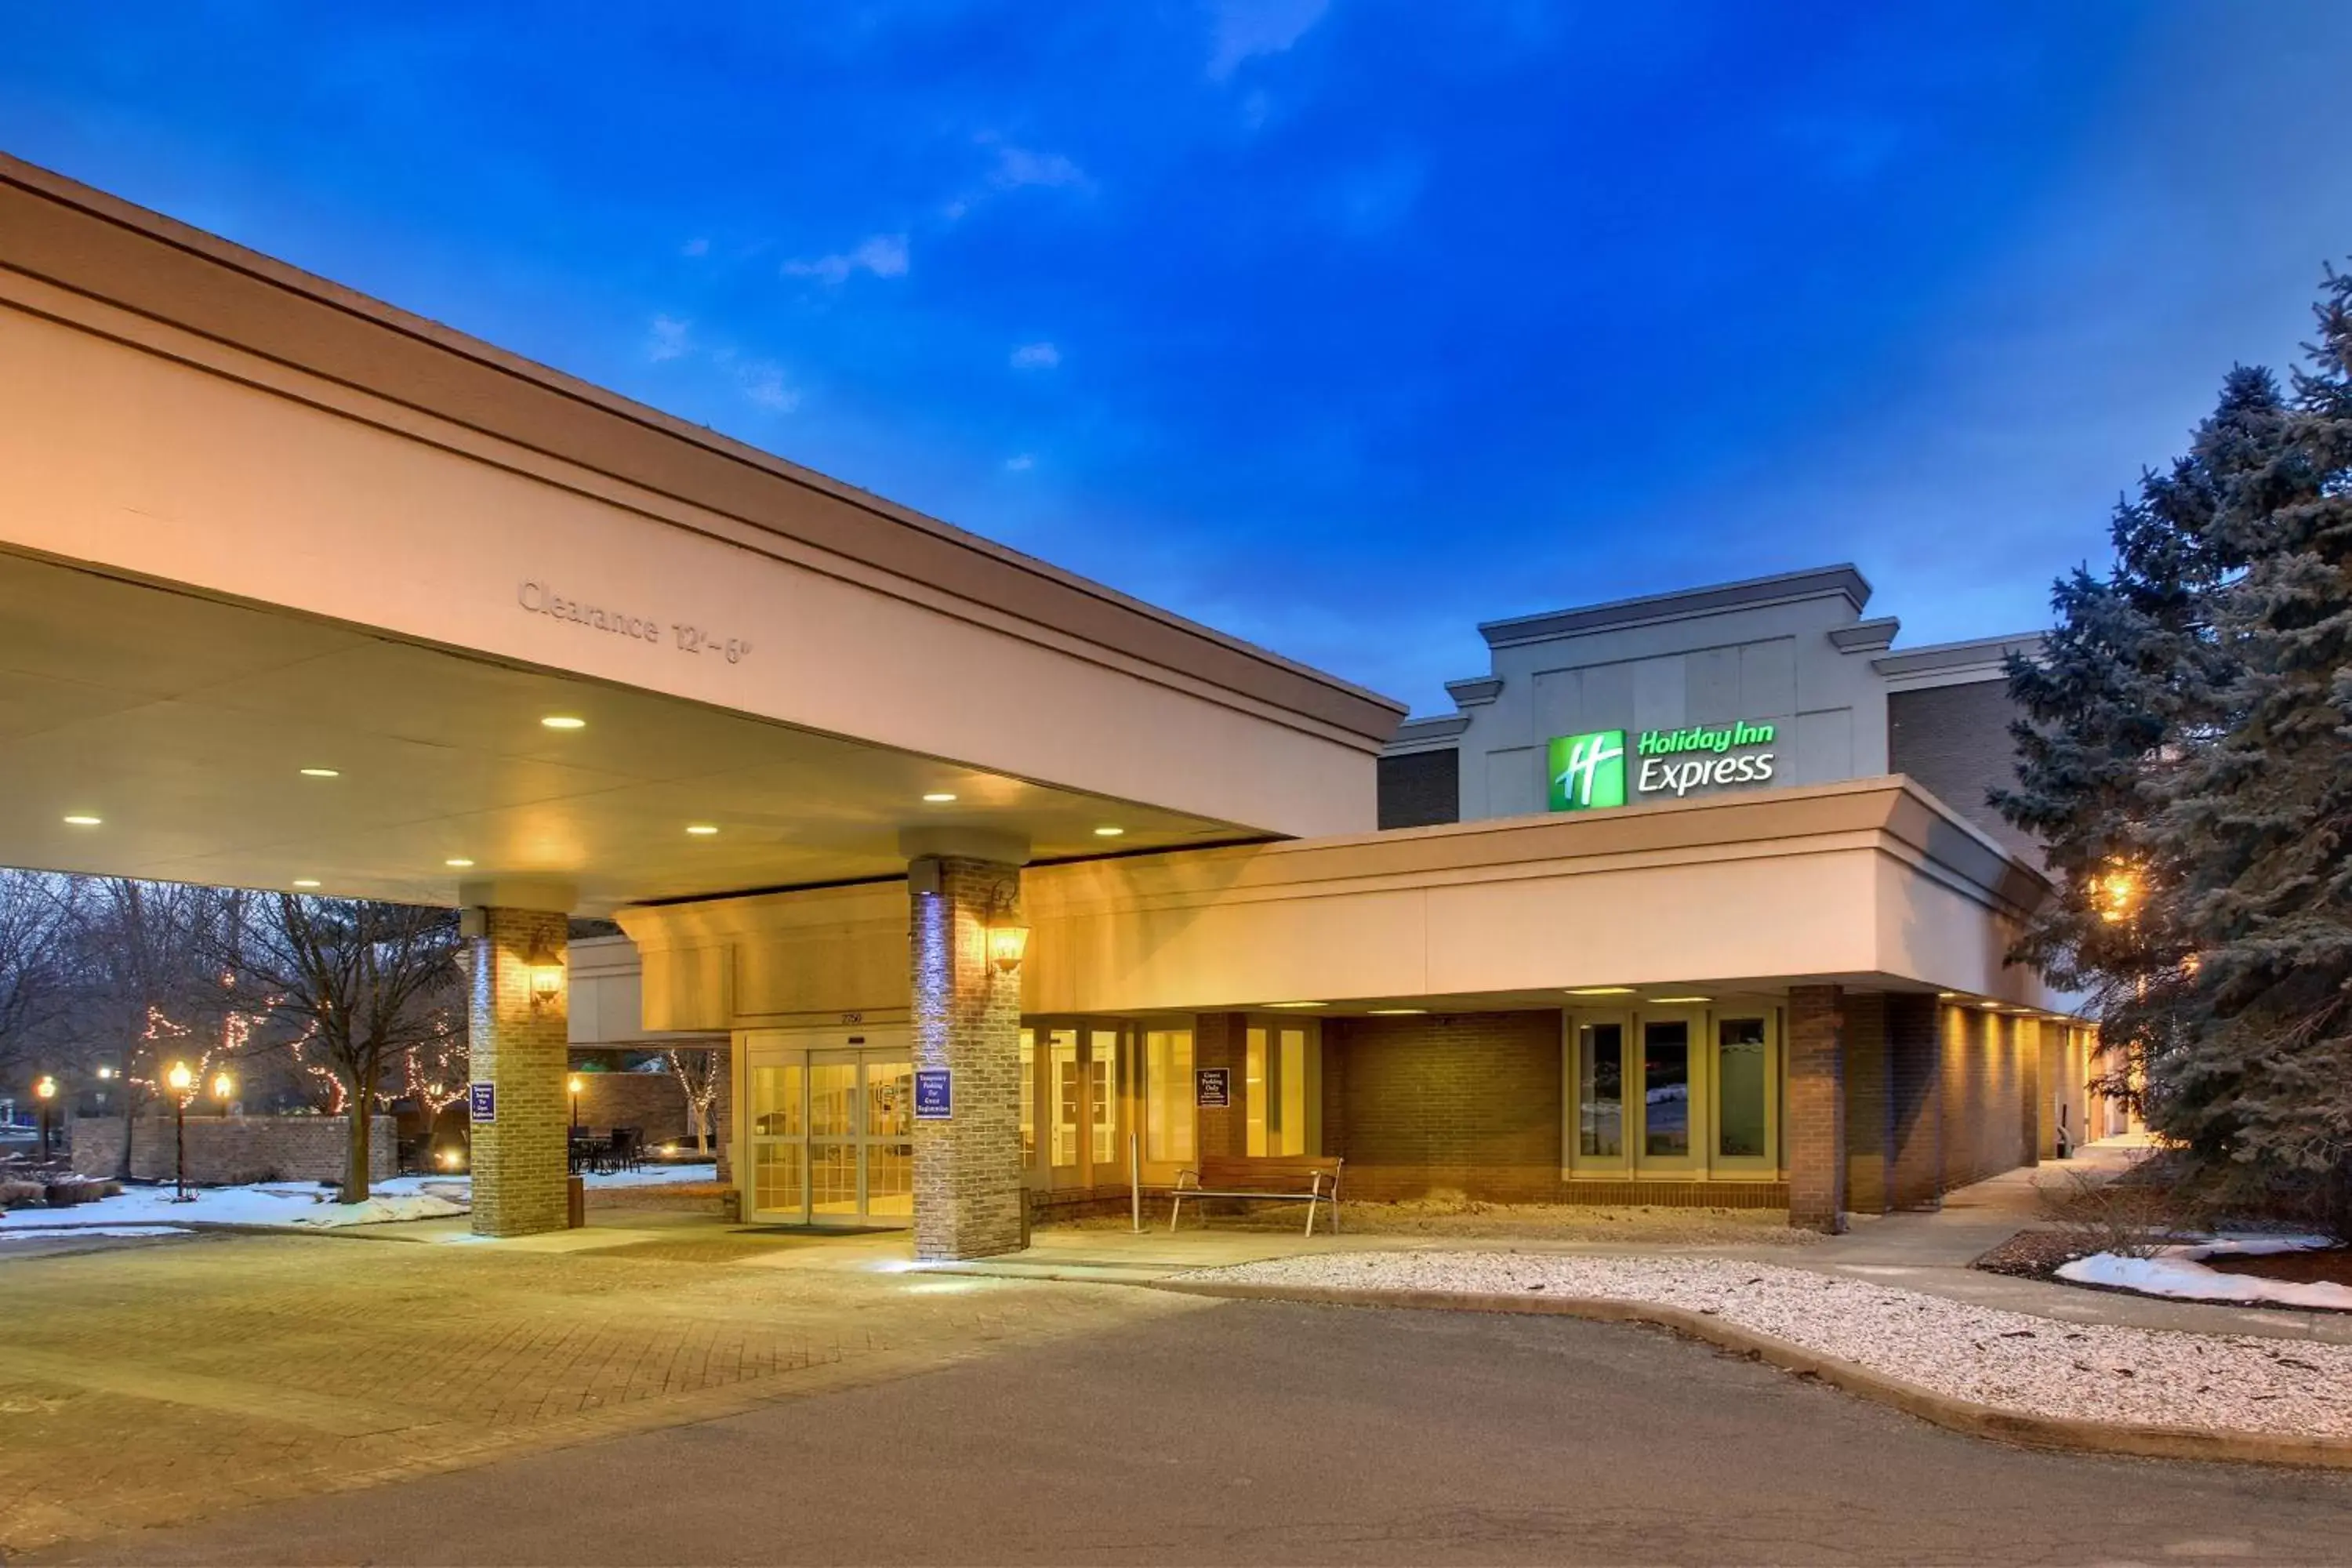 Property building in Holiday Inn Express Poughkeepsie, an IHG Hotel